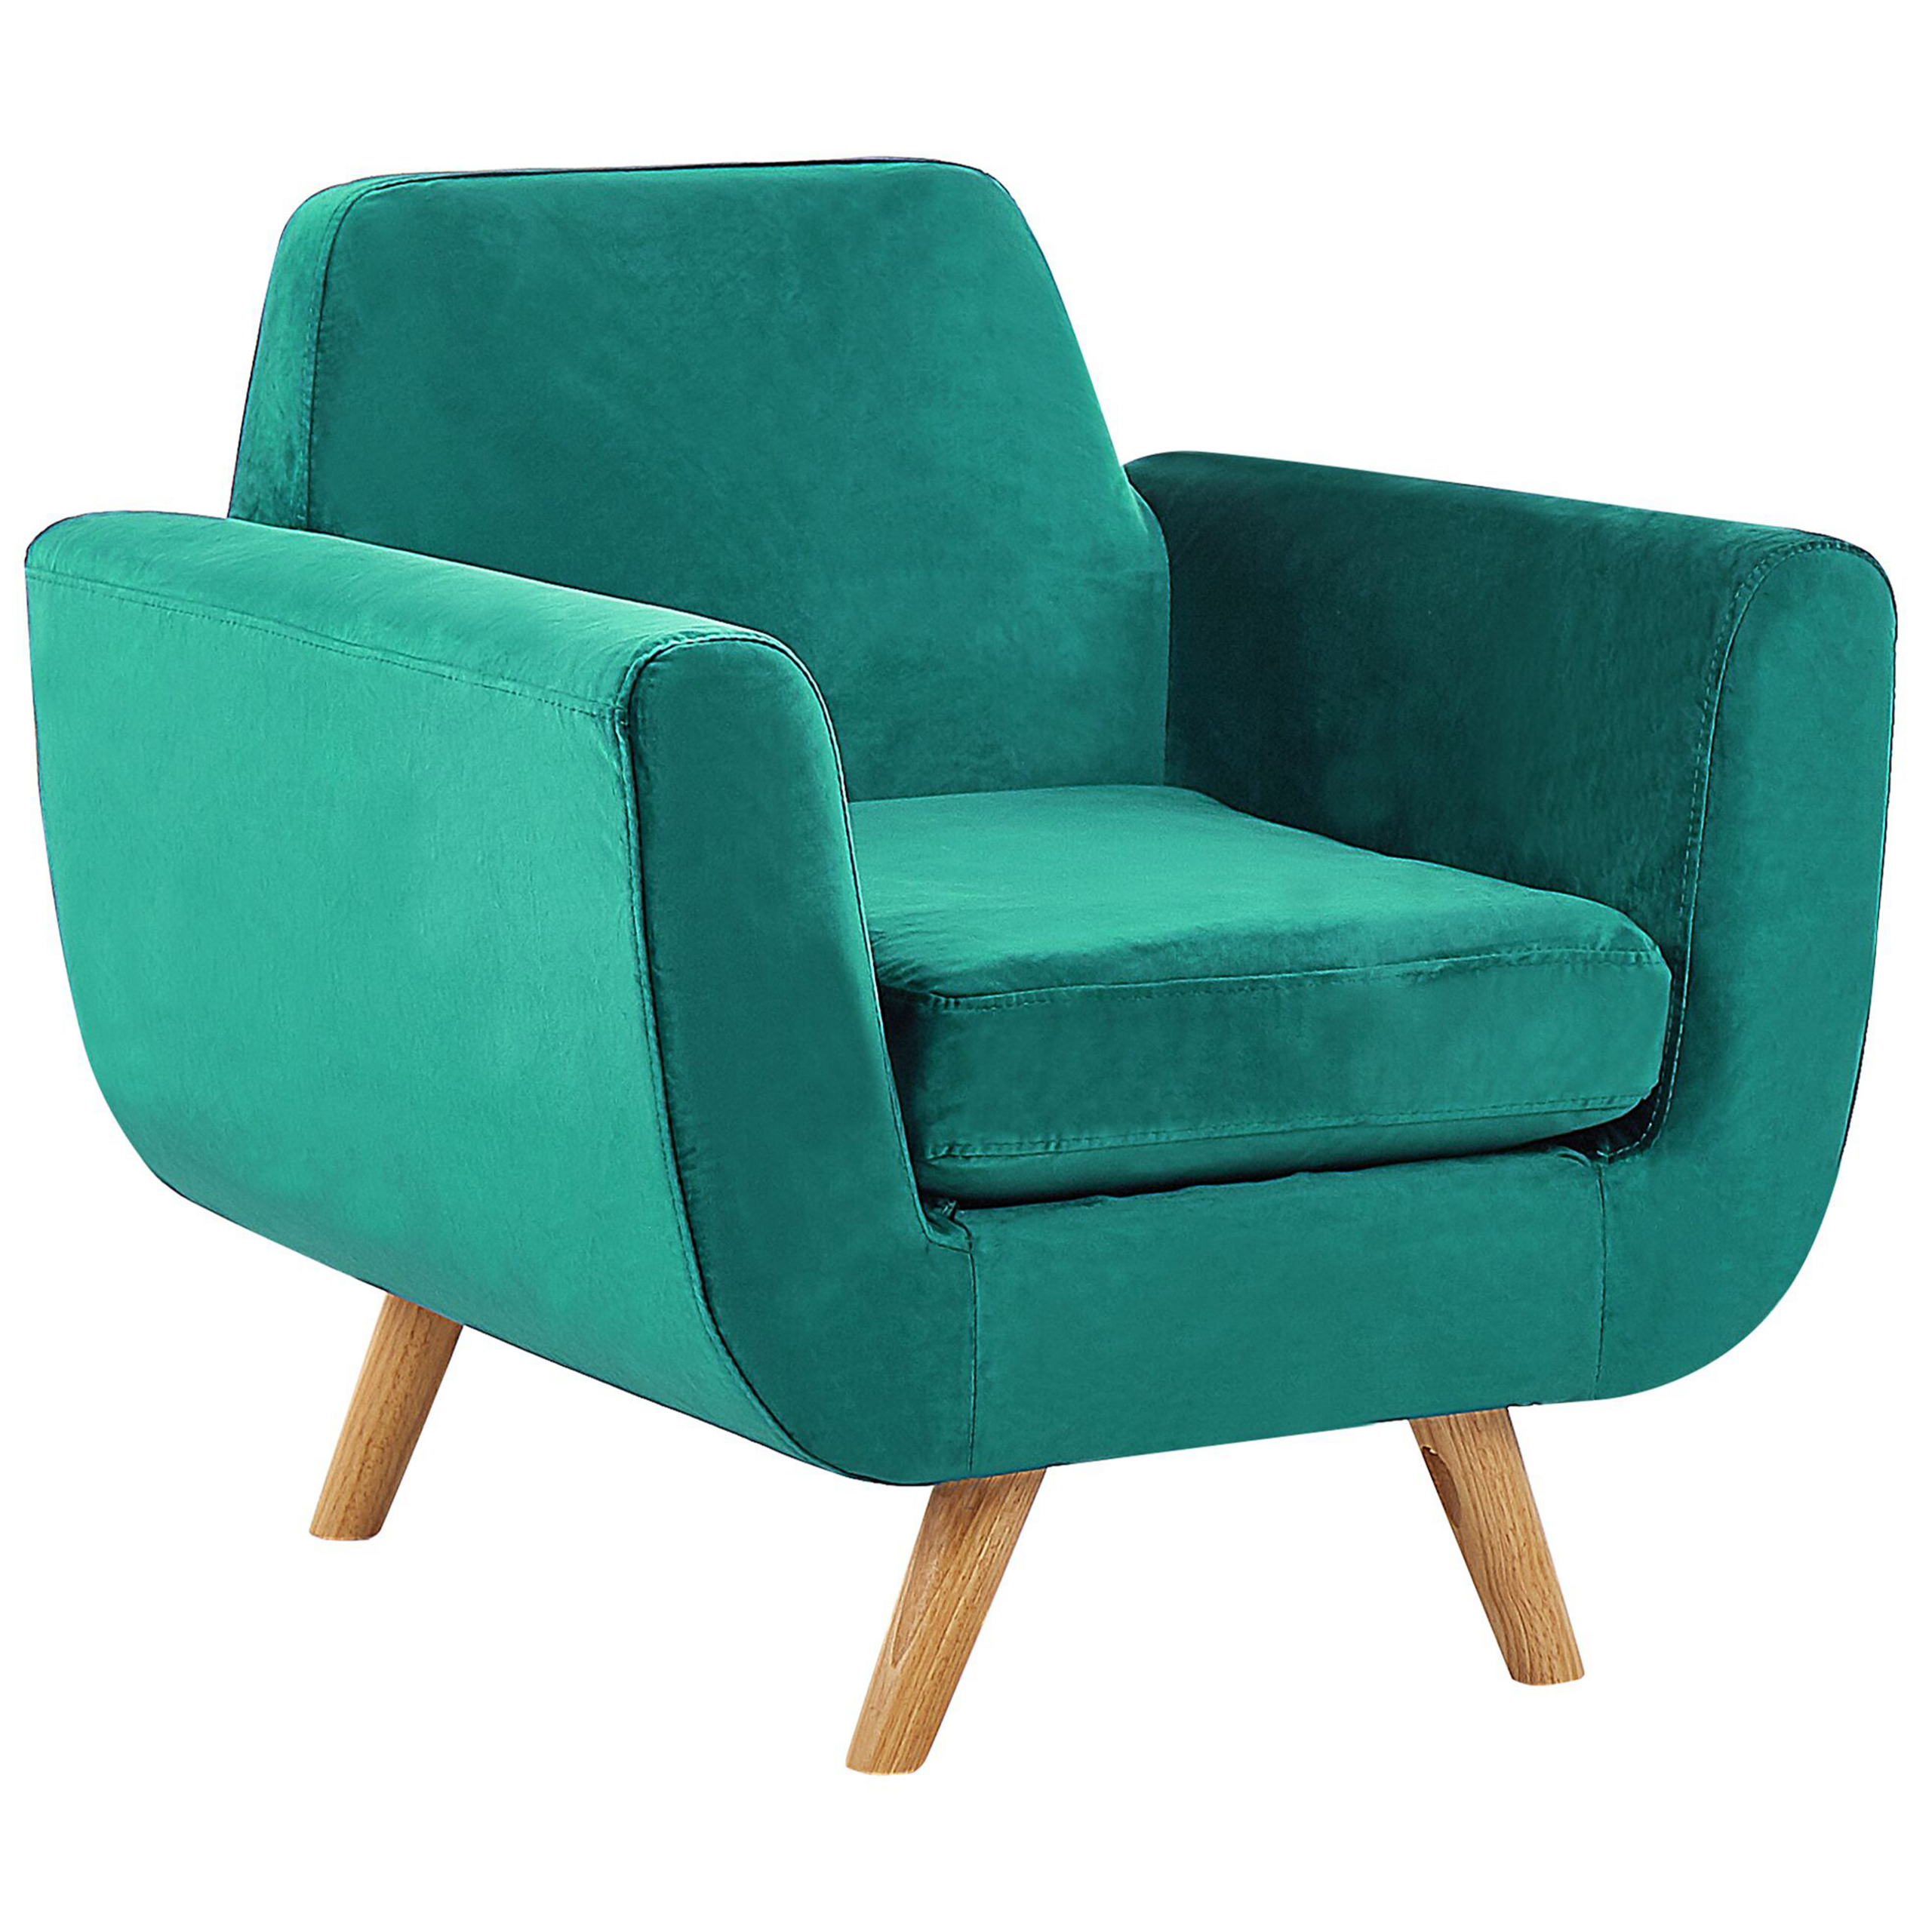 Beliani Armchair Grey Velvet Upholstery on Slanted Wooden Legs with Removable Cover Retro Style